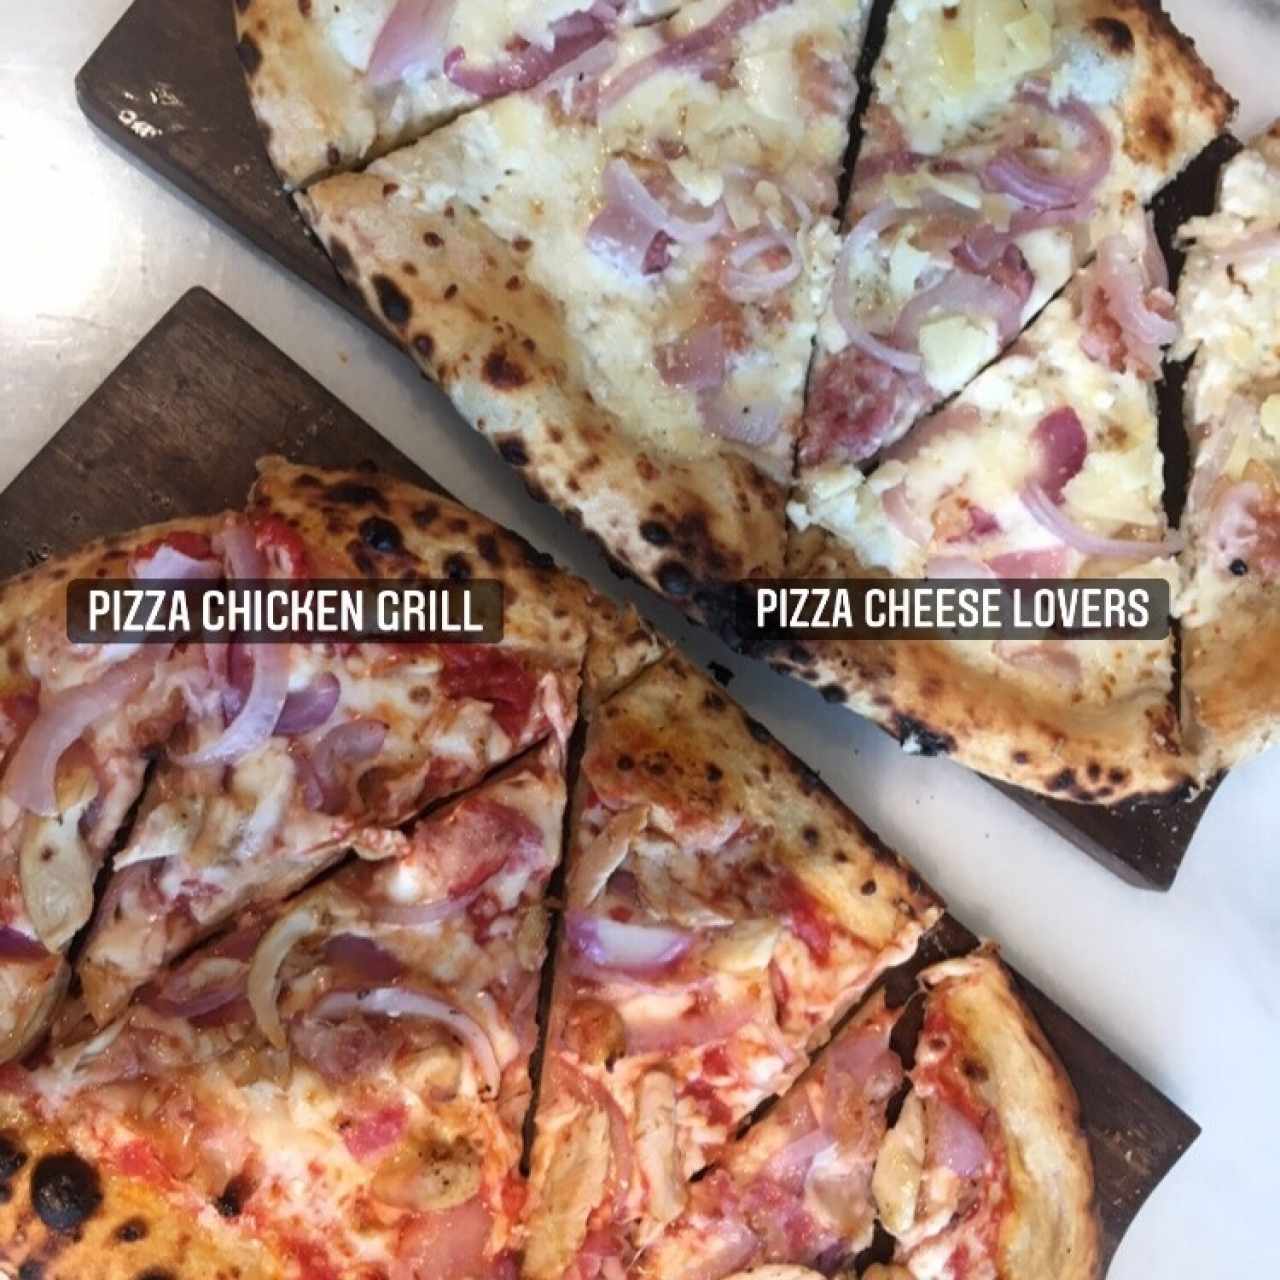 Pizza Cheese Lovers & Pizza Chicken Grill